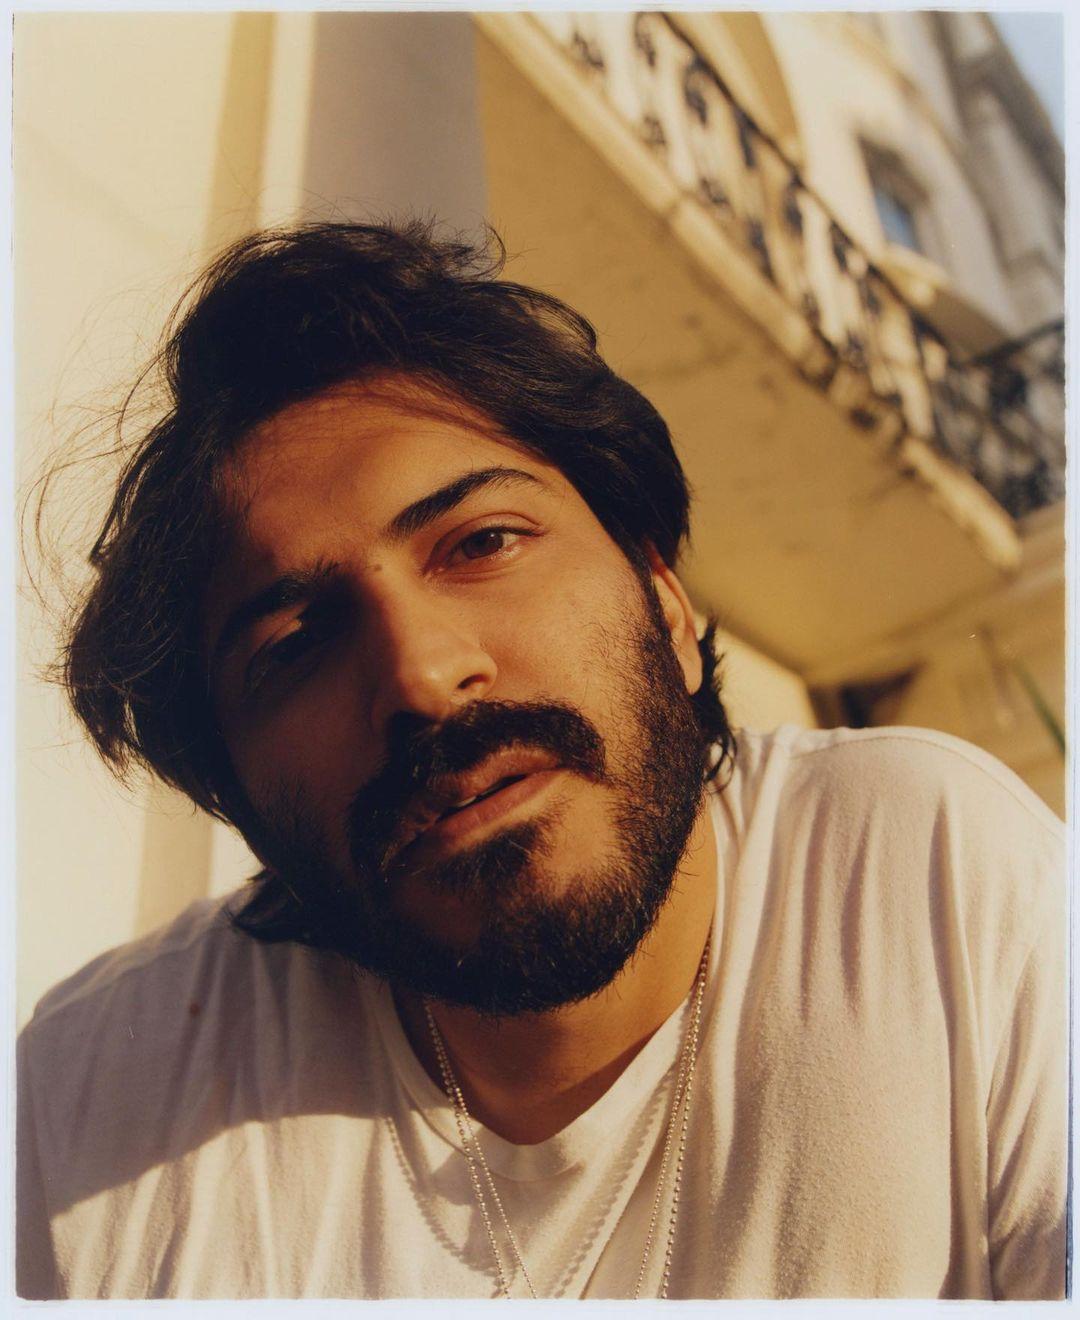 Harshvardhan Kapoor, son of Anil Kapoor, made his acting debut in 2016 with 